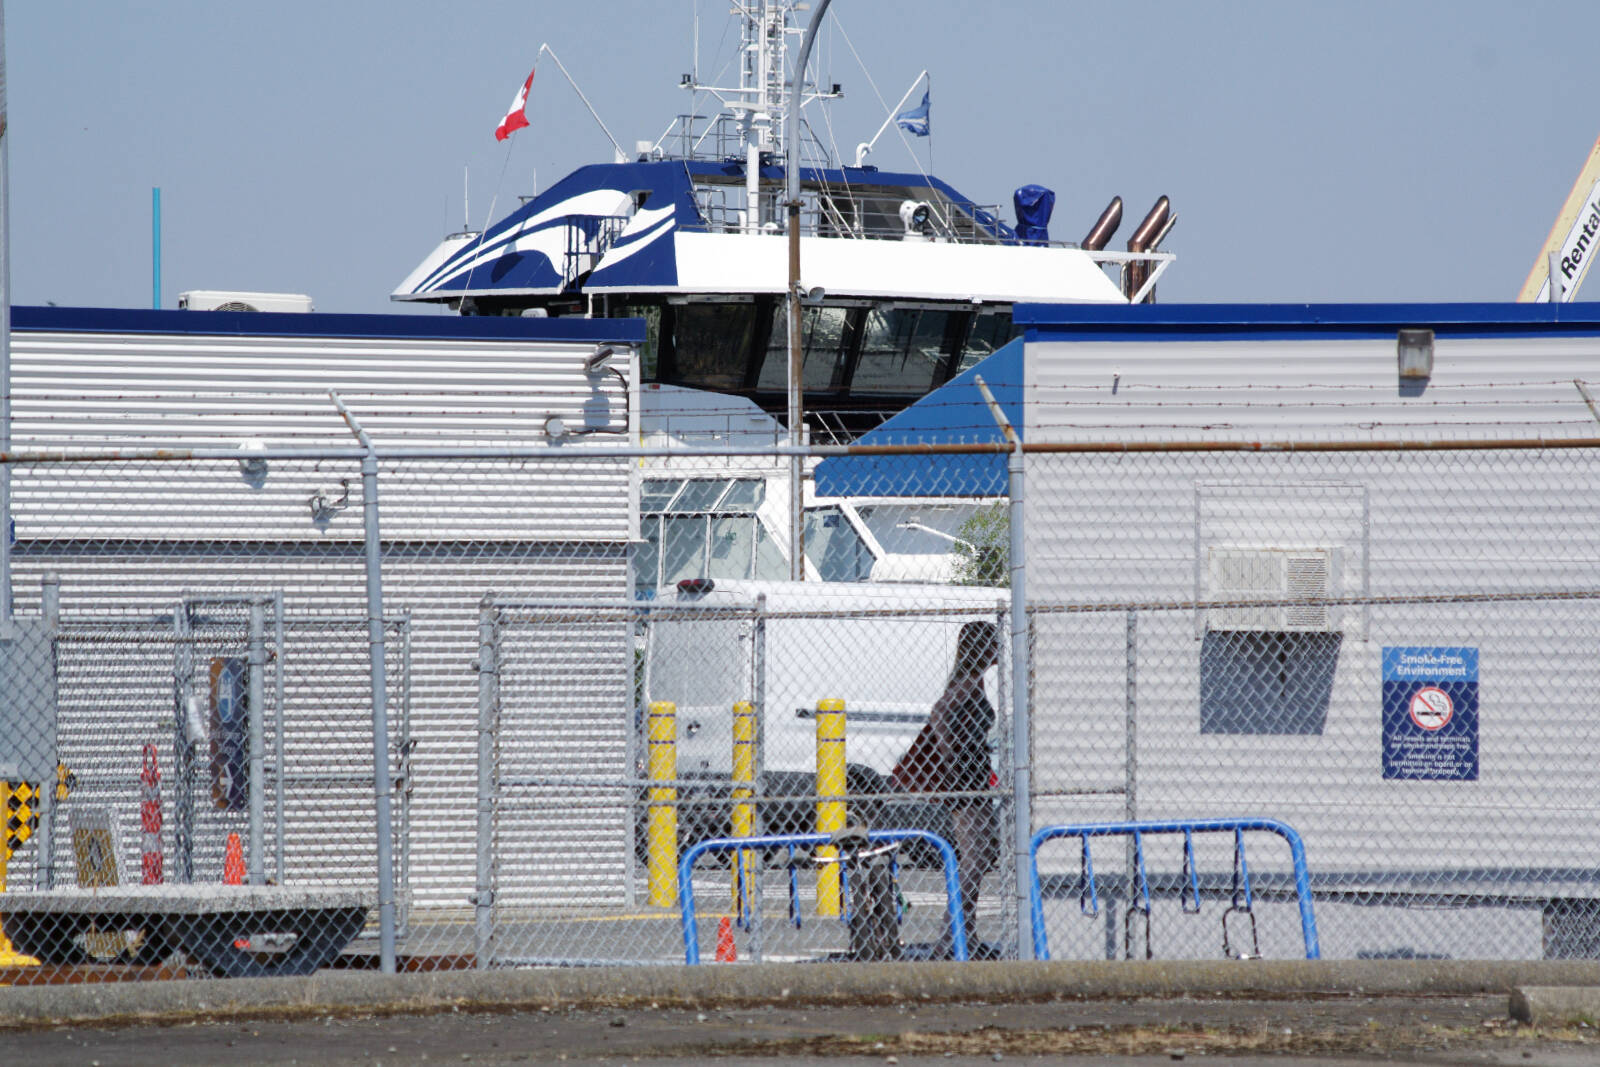 The BC Ferries terminal at Nanaimo Harbour. (News Bulletin file photo)